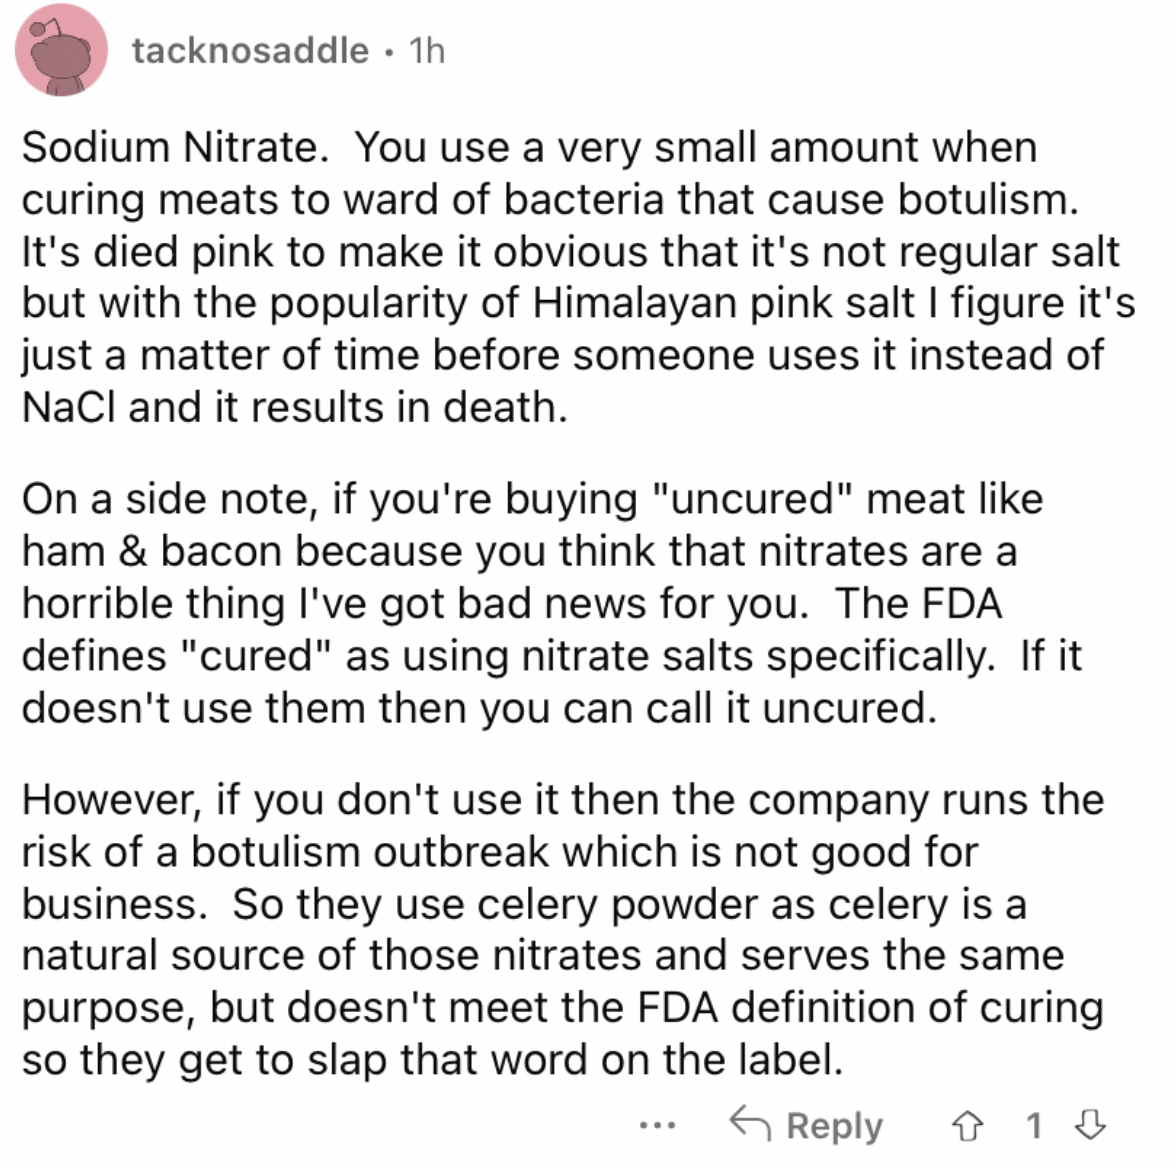 Reddit screenshot about sodium nitrate in small mishandled amounts being deadly.